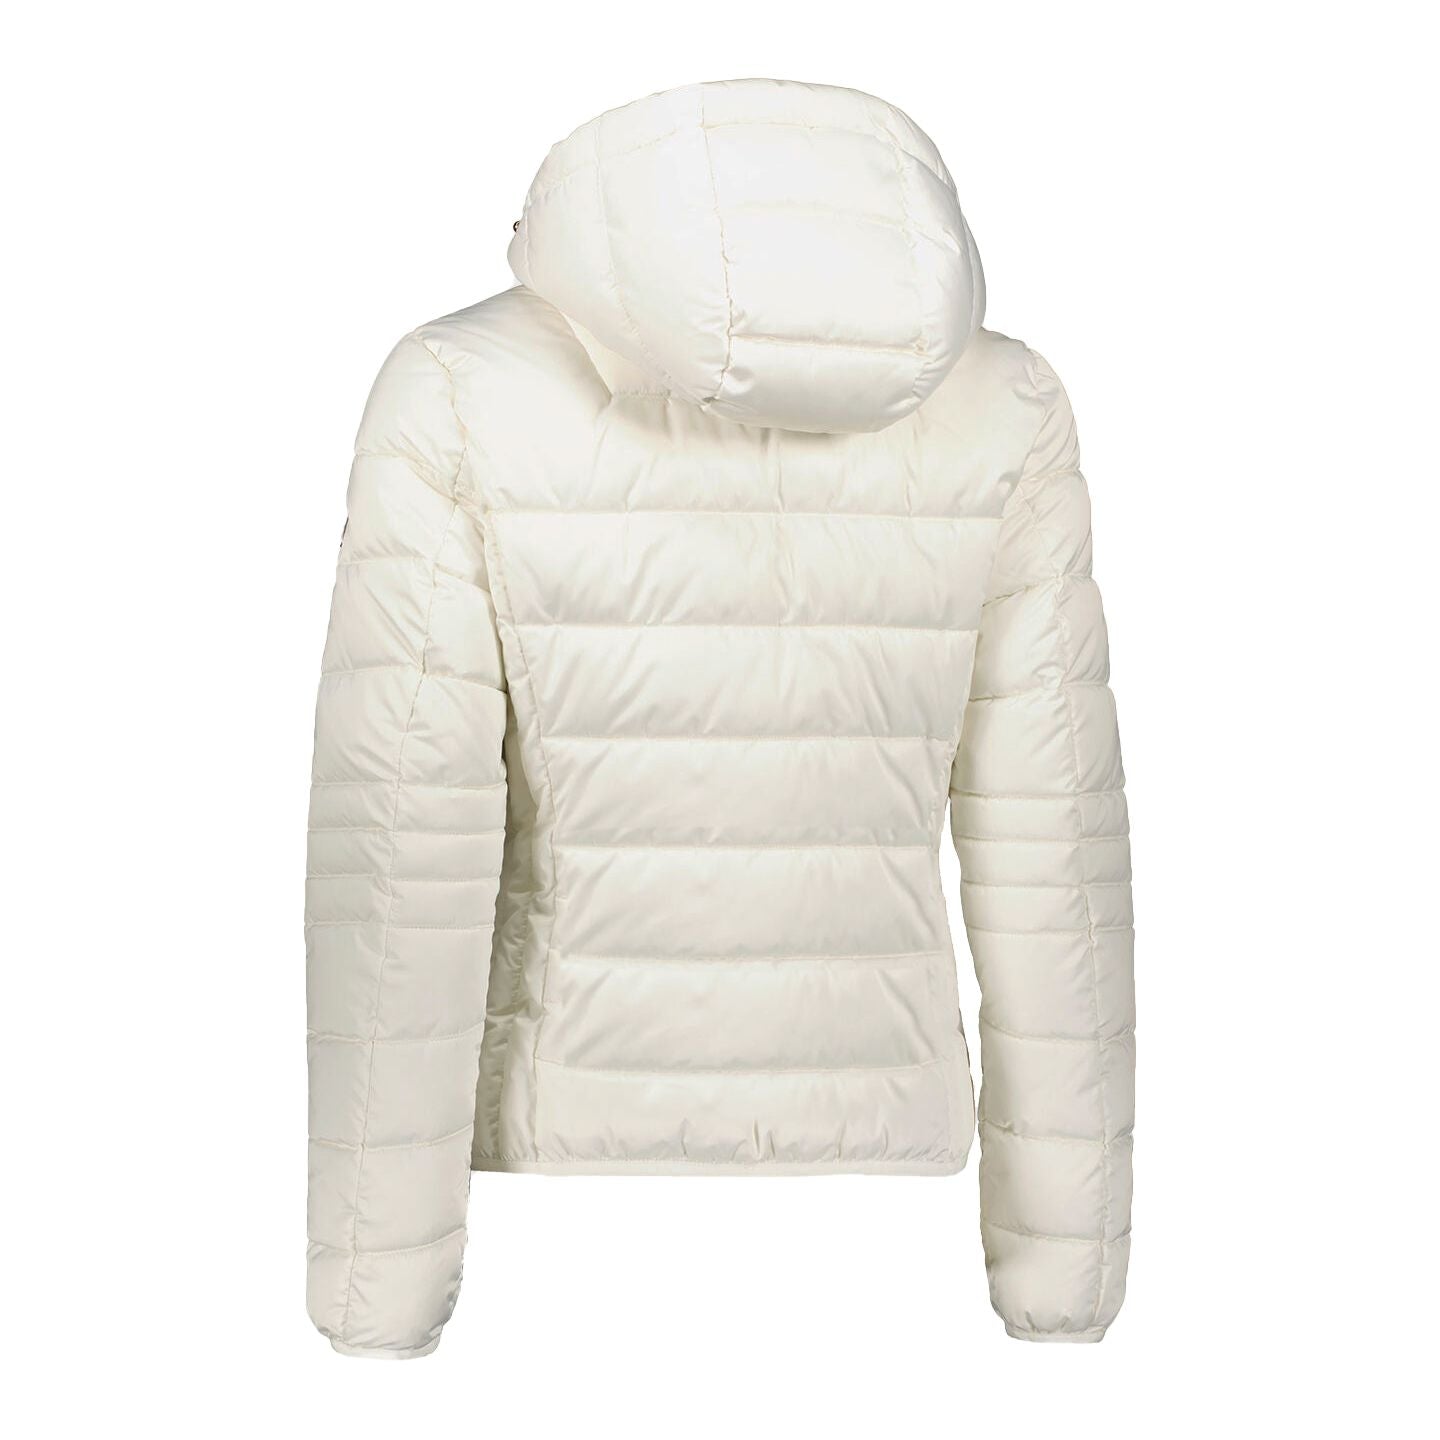 Chic White Short Down Jacket with Hood